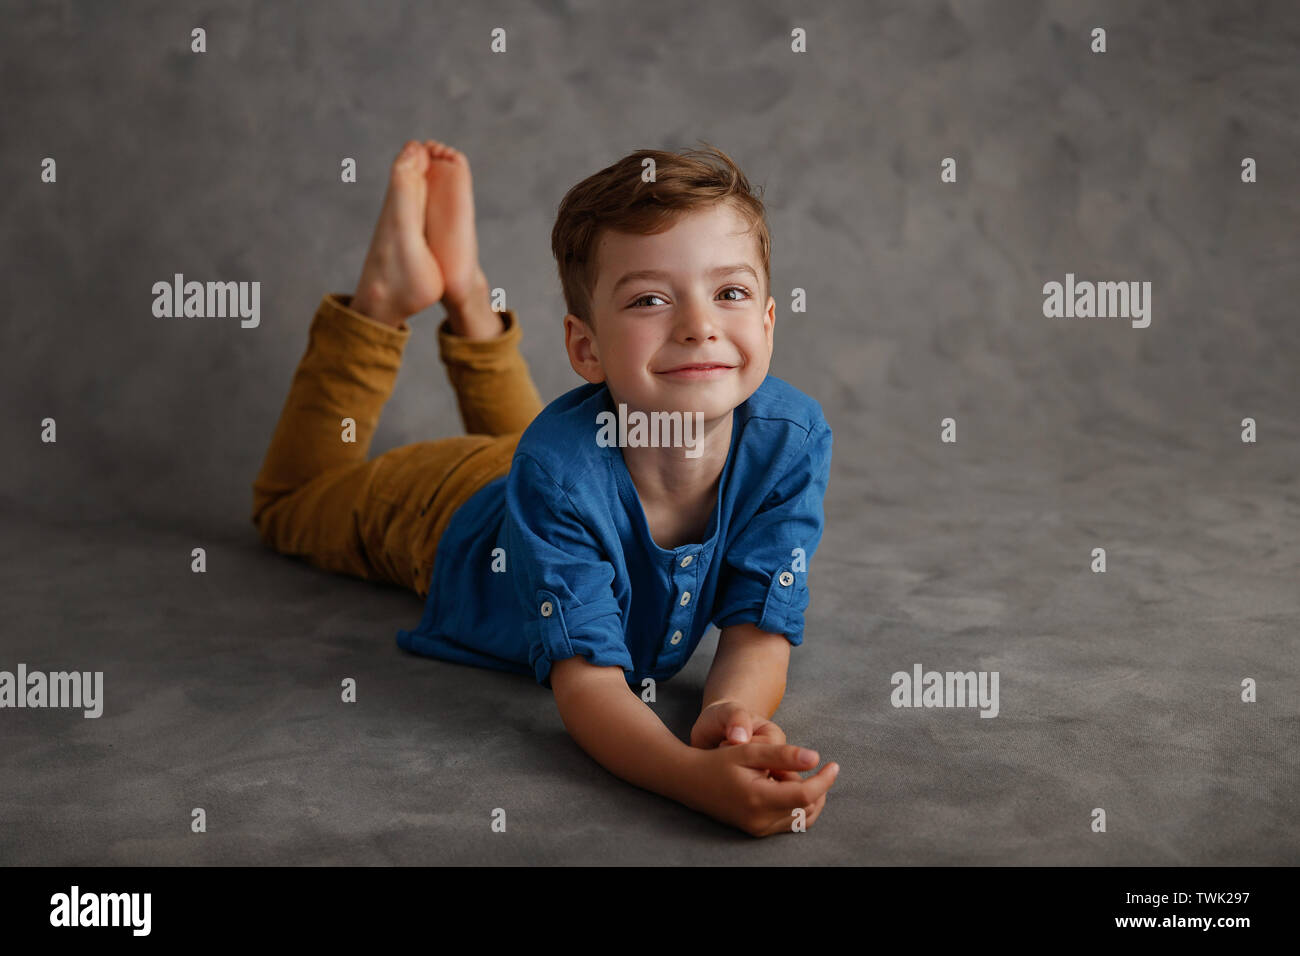 5 year old boy blue shirt and yellow pants studio portrait on gray background. Stock Photo